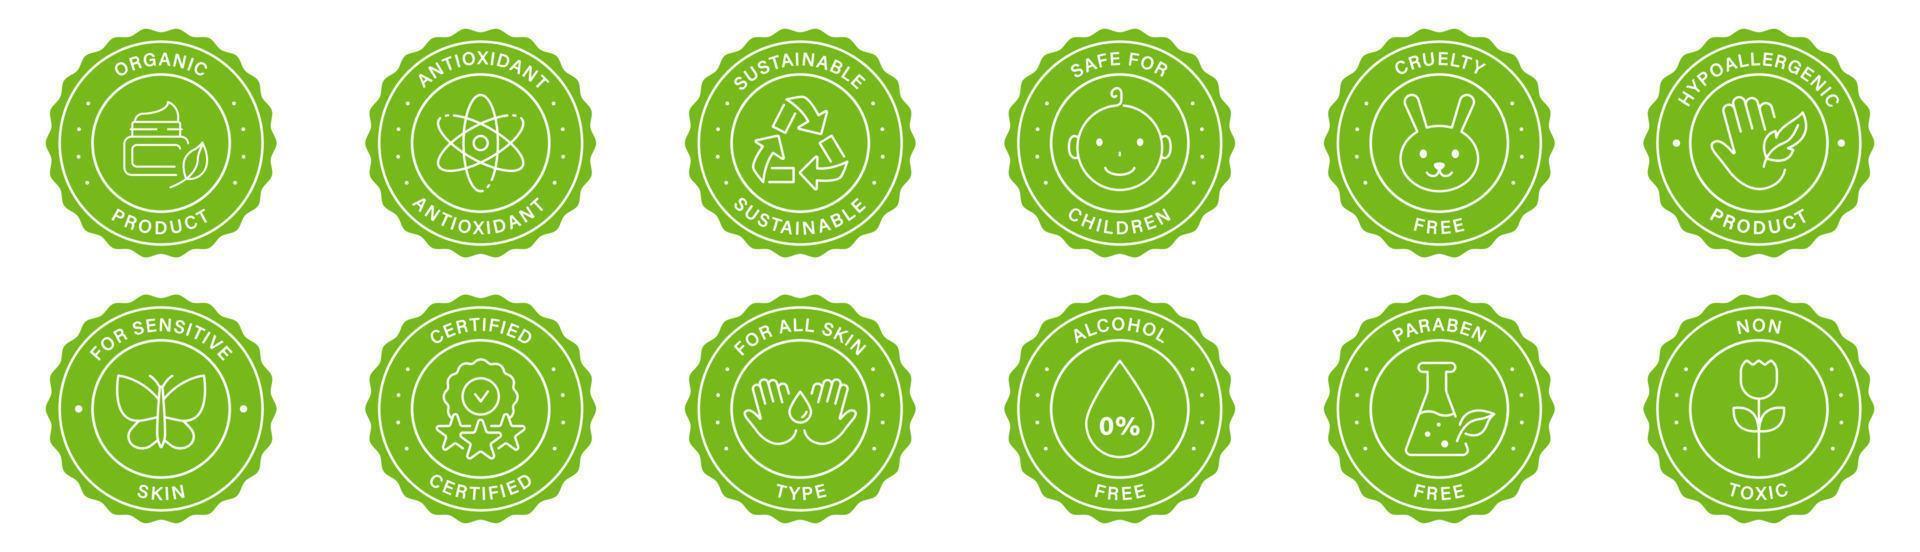 Nature Organic Eco Friendly Cosmetic Ingredient Green Label Set. Bio Makeup Cosmetic Product Stamp. Cruelty Free, Natural Skincare Sticker. Herbal Certificate Sign. Isolated Vector Illustration.